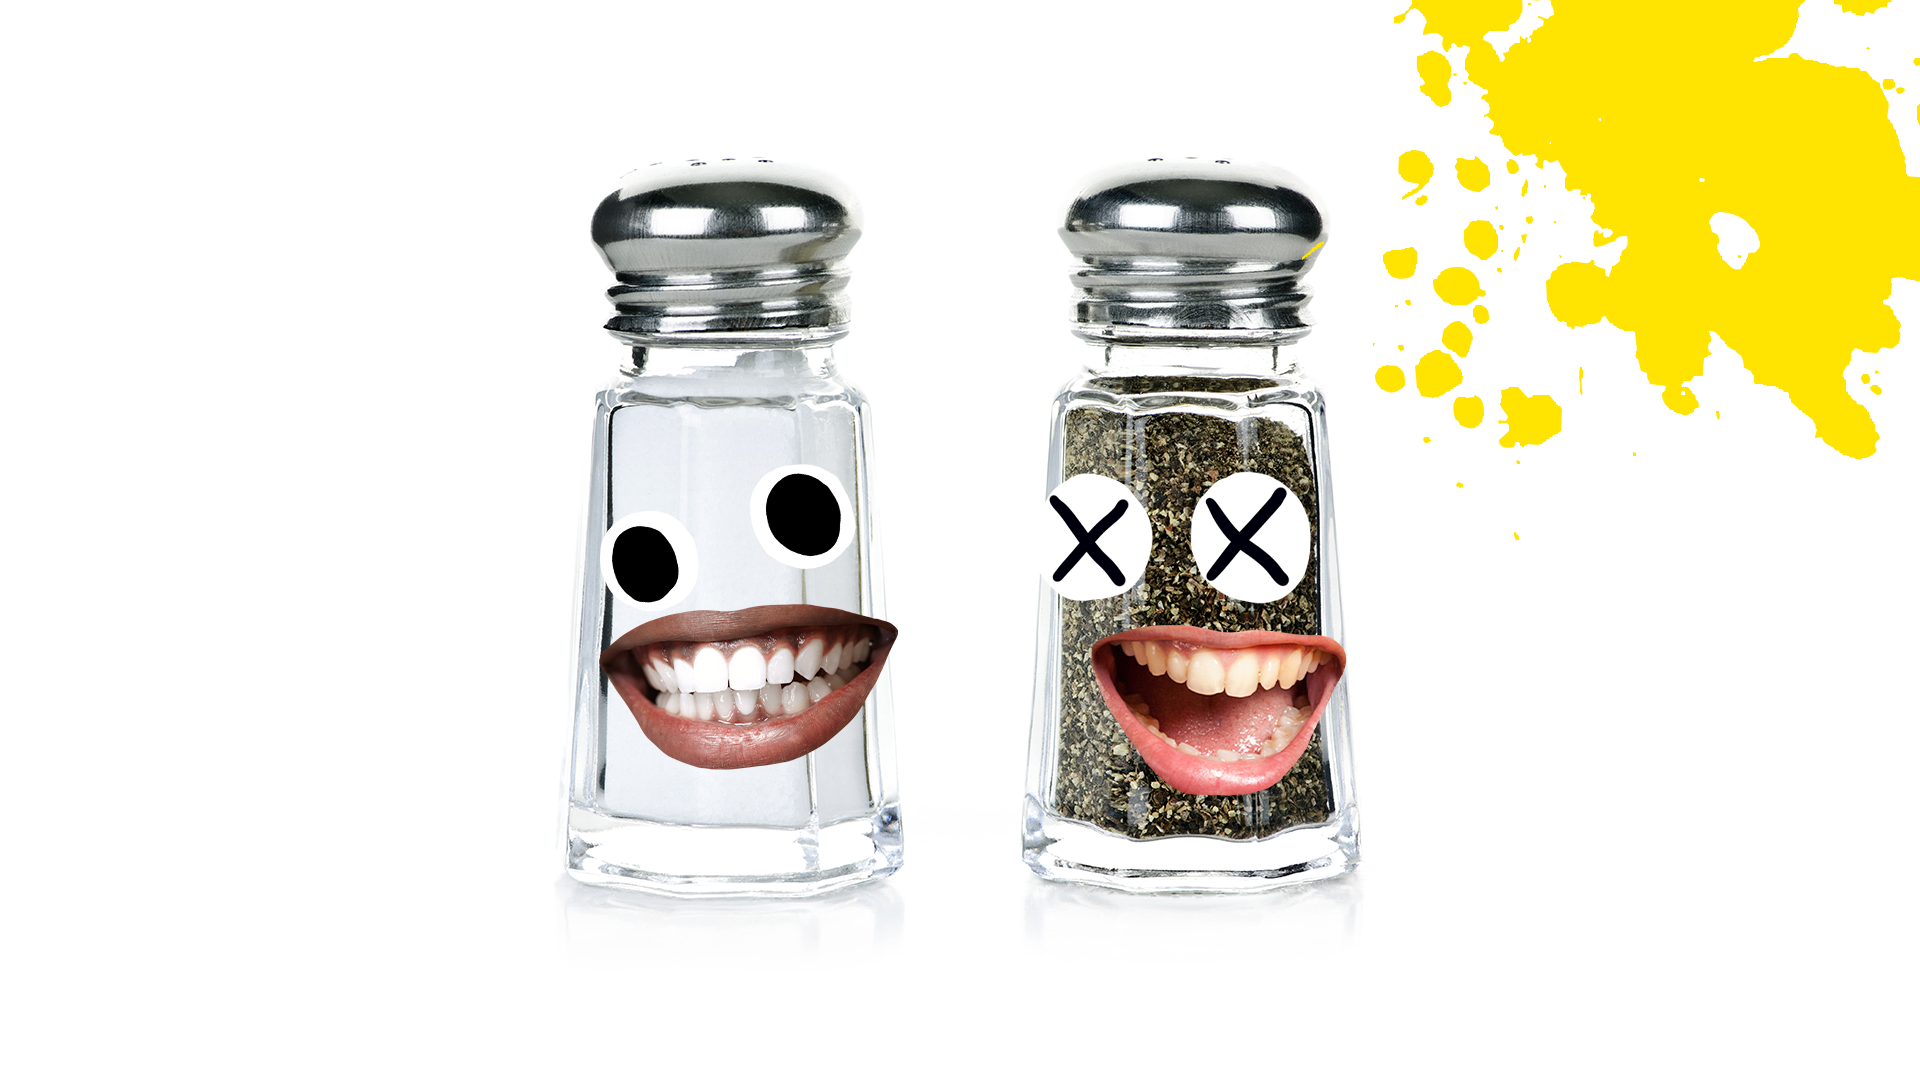 Salt and pepper shakers with derpy faces, yellow and white background